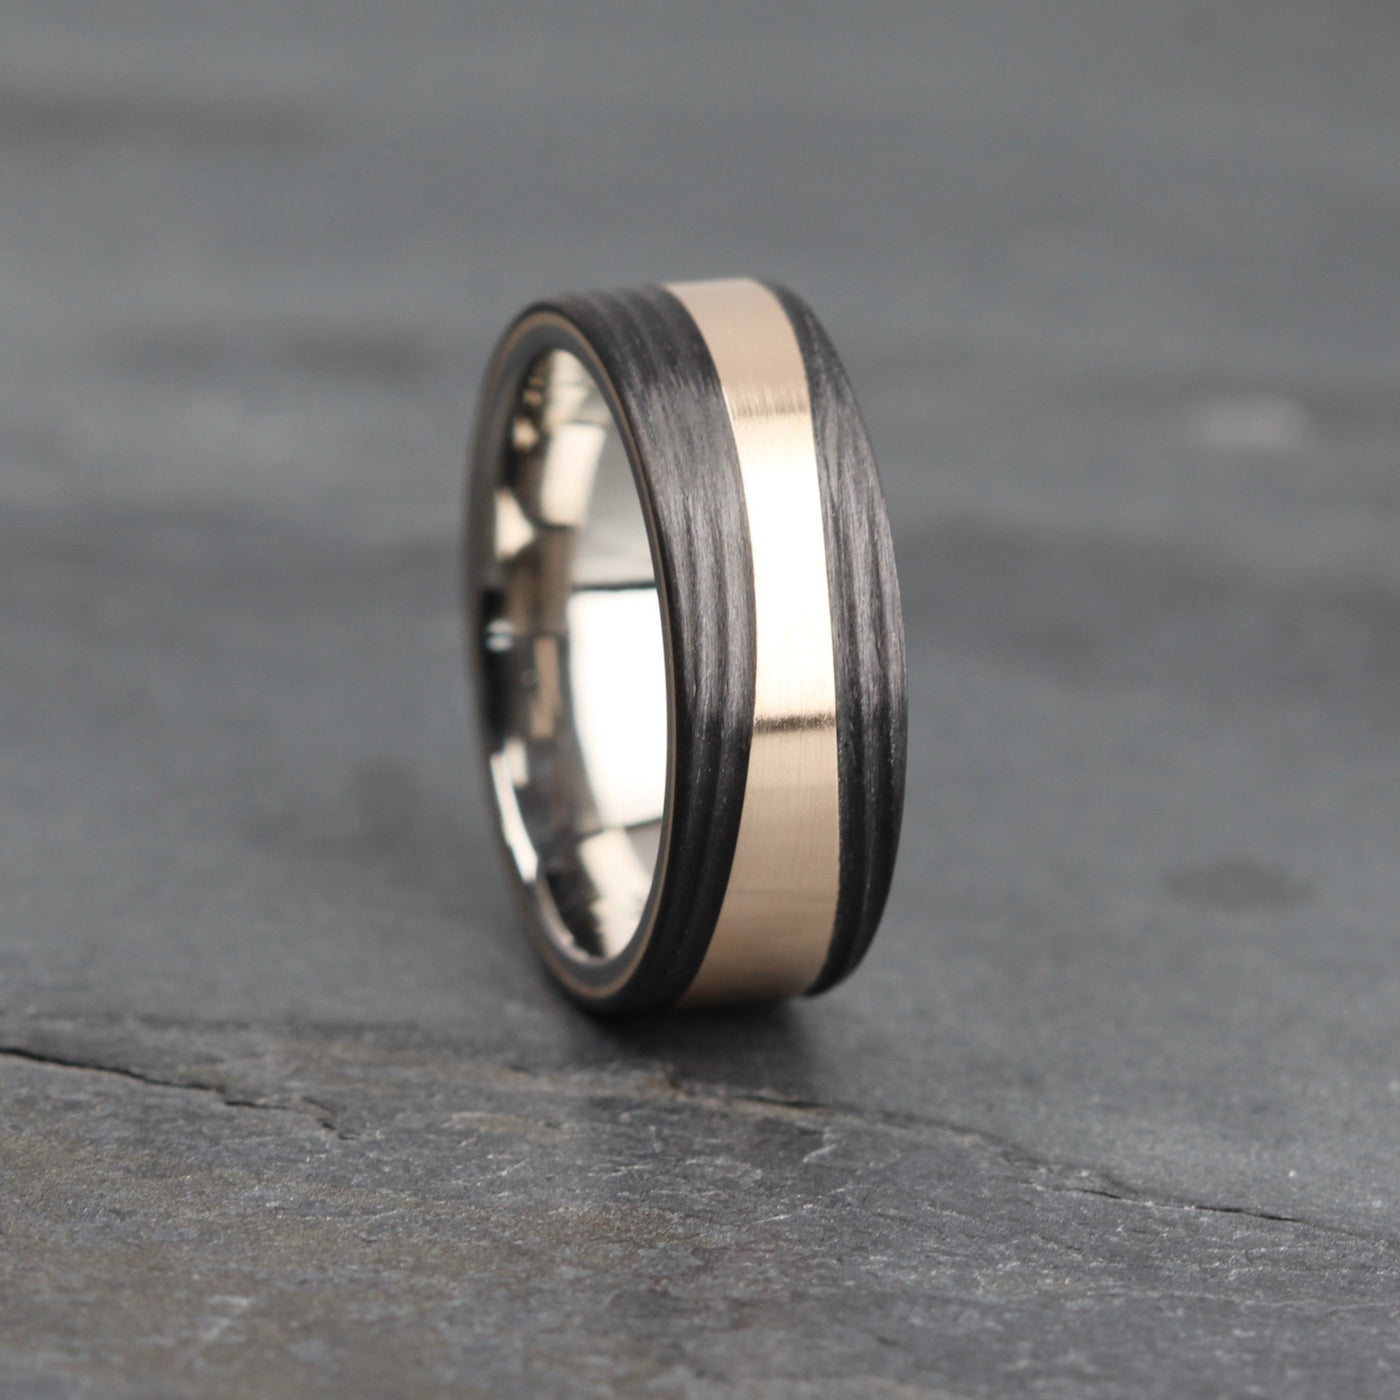 Bronze and Black Carbon Fibre Wedding Ring Band 8mm + Free Engraving